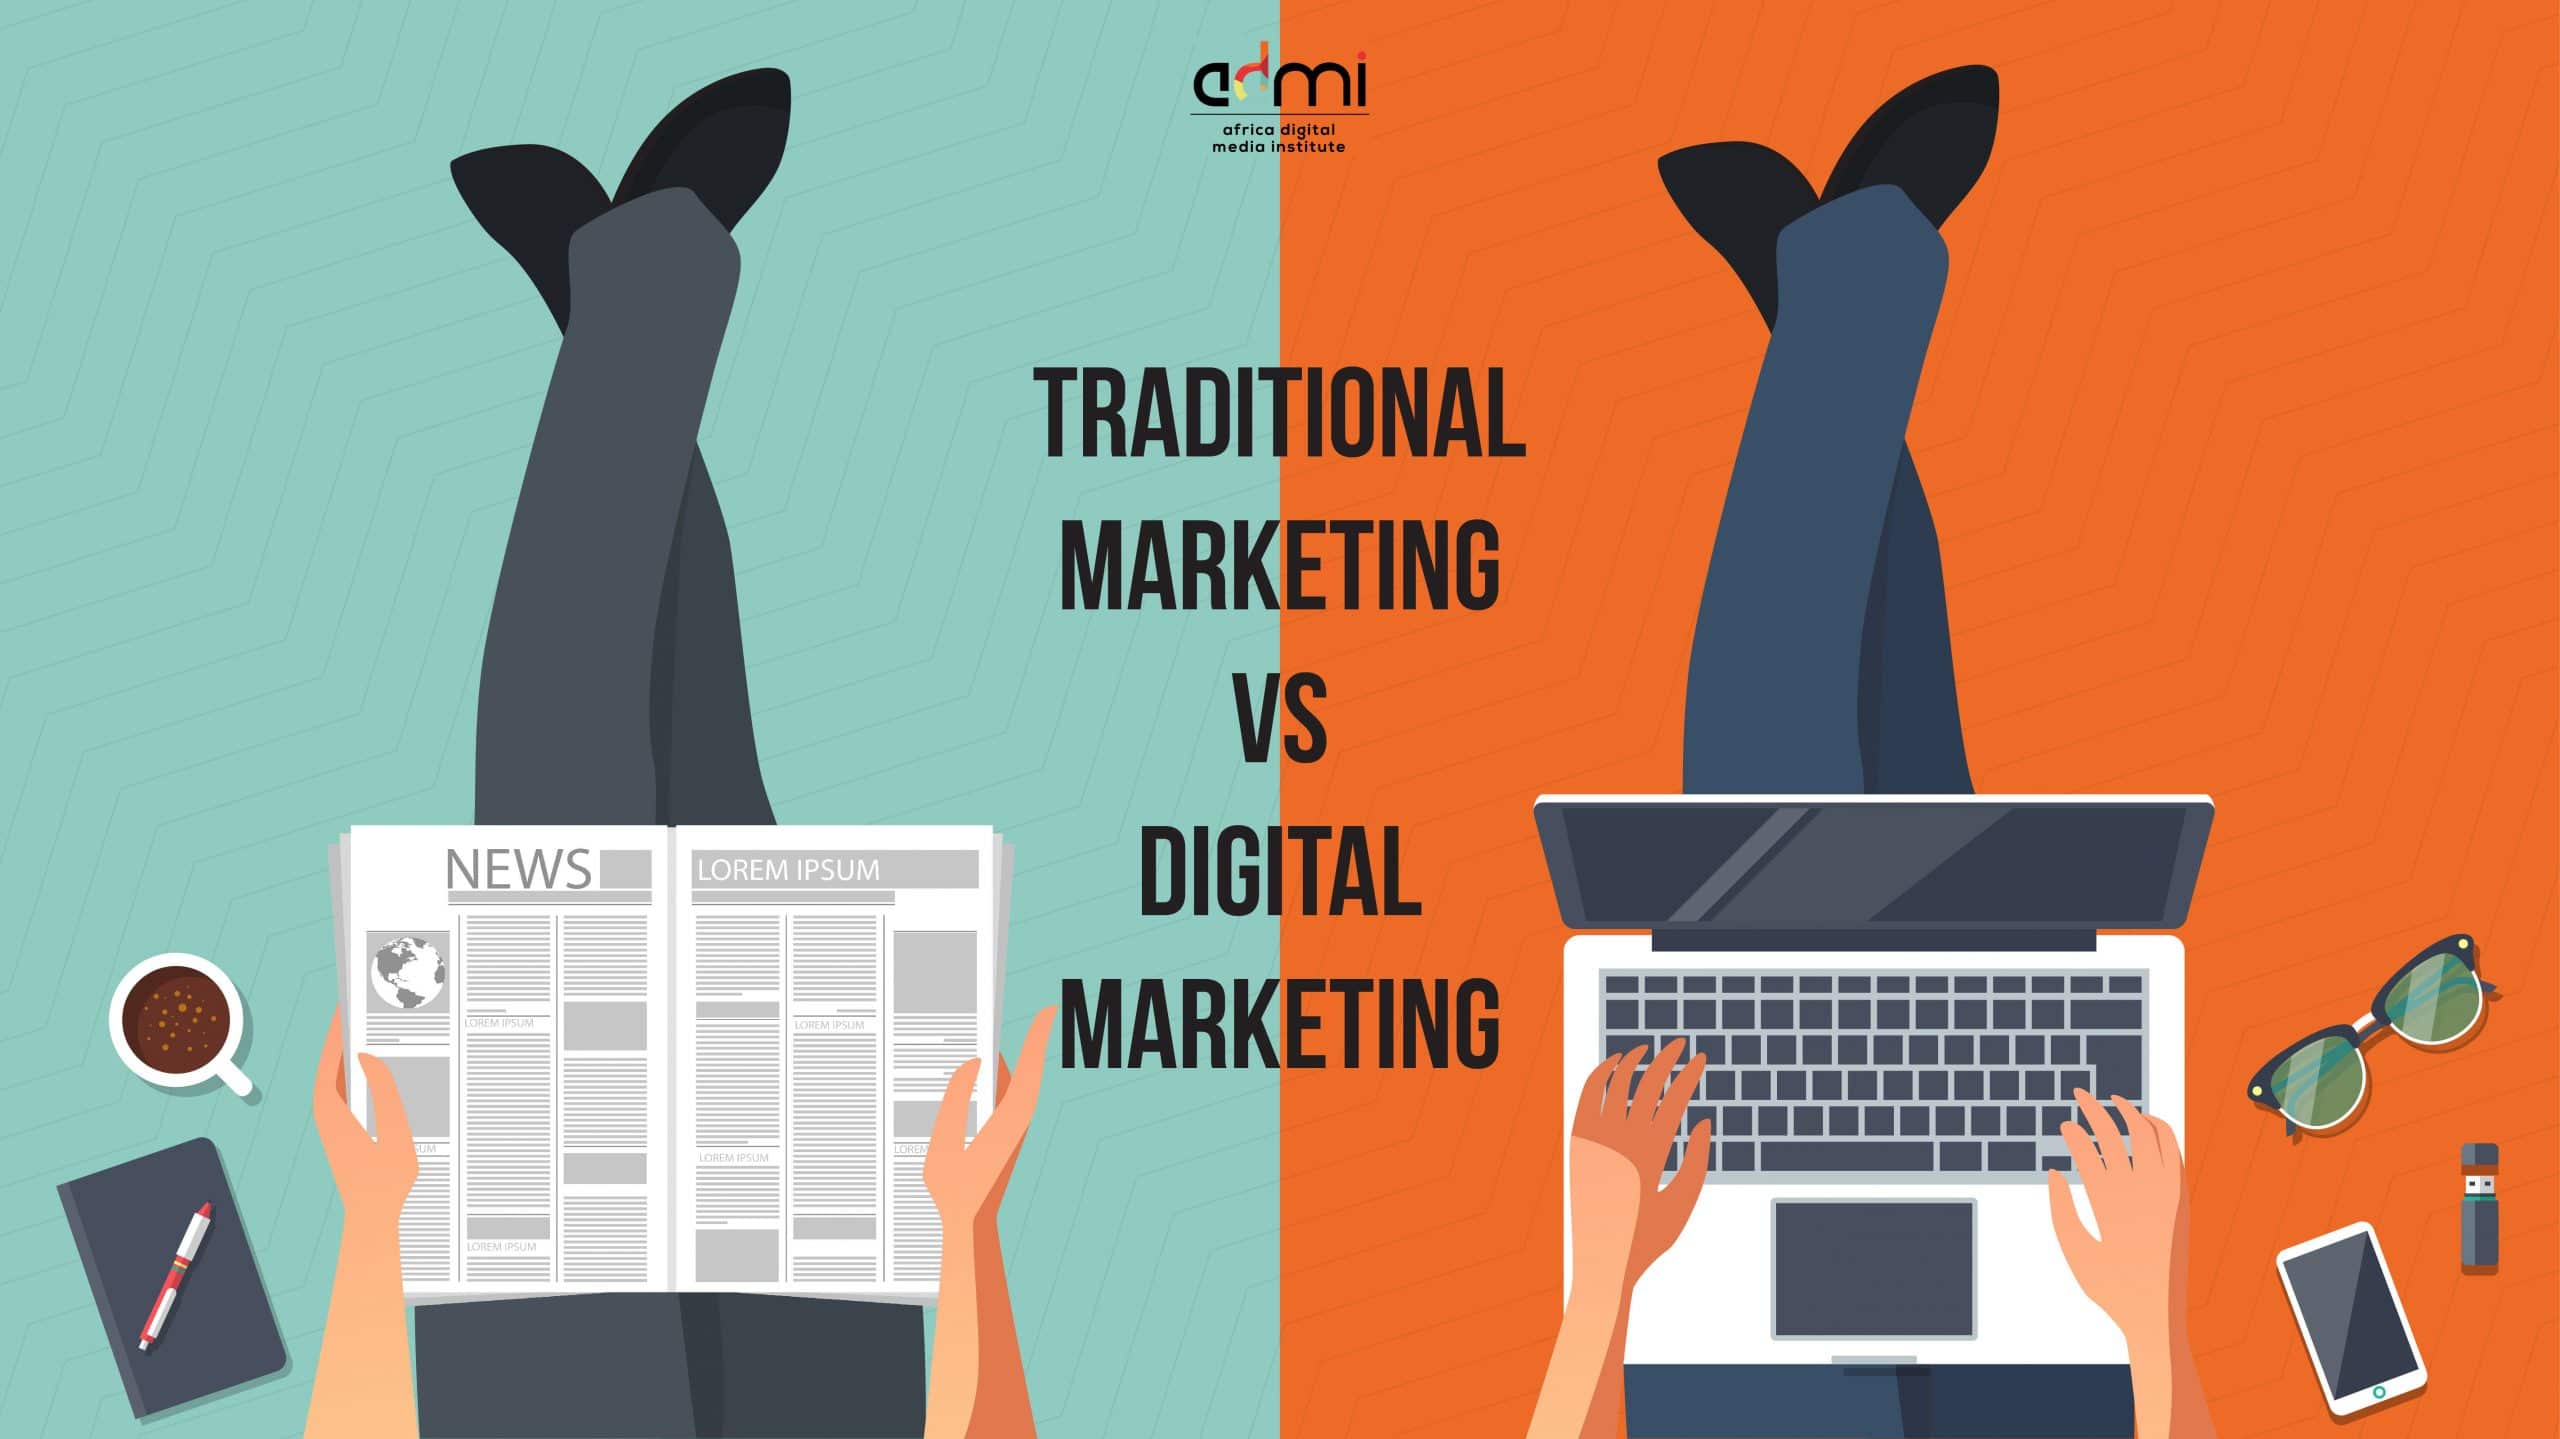 Digital Marketing is the use of electronic devices to convey promotional messages and measure their impact